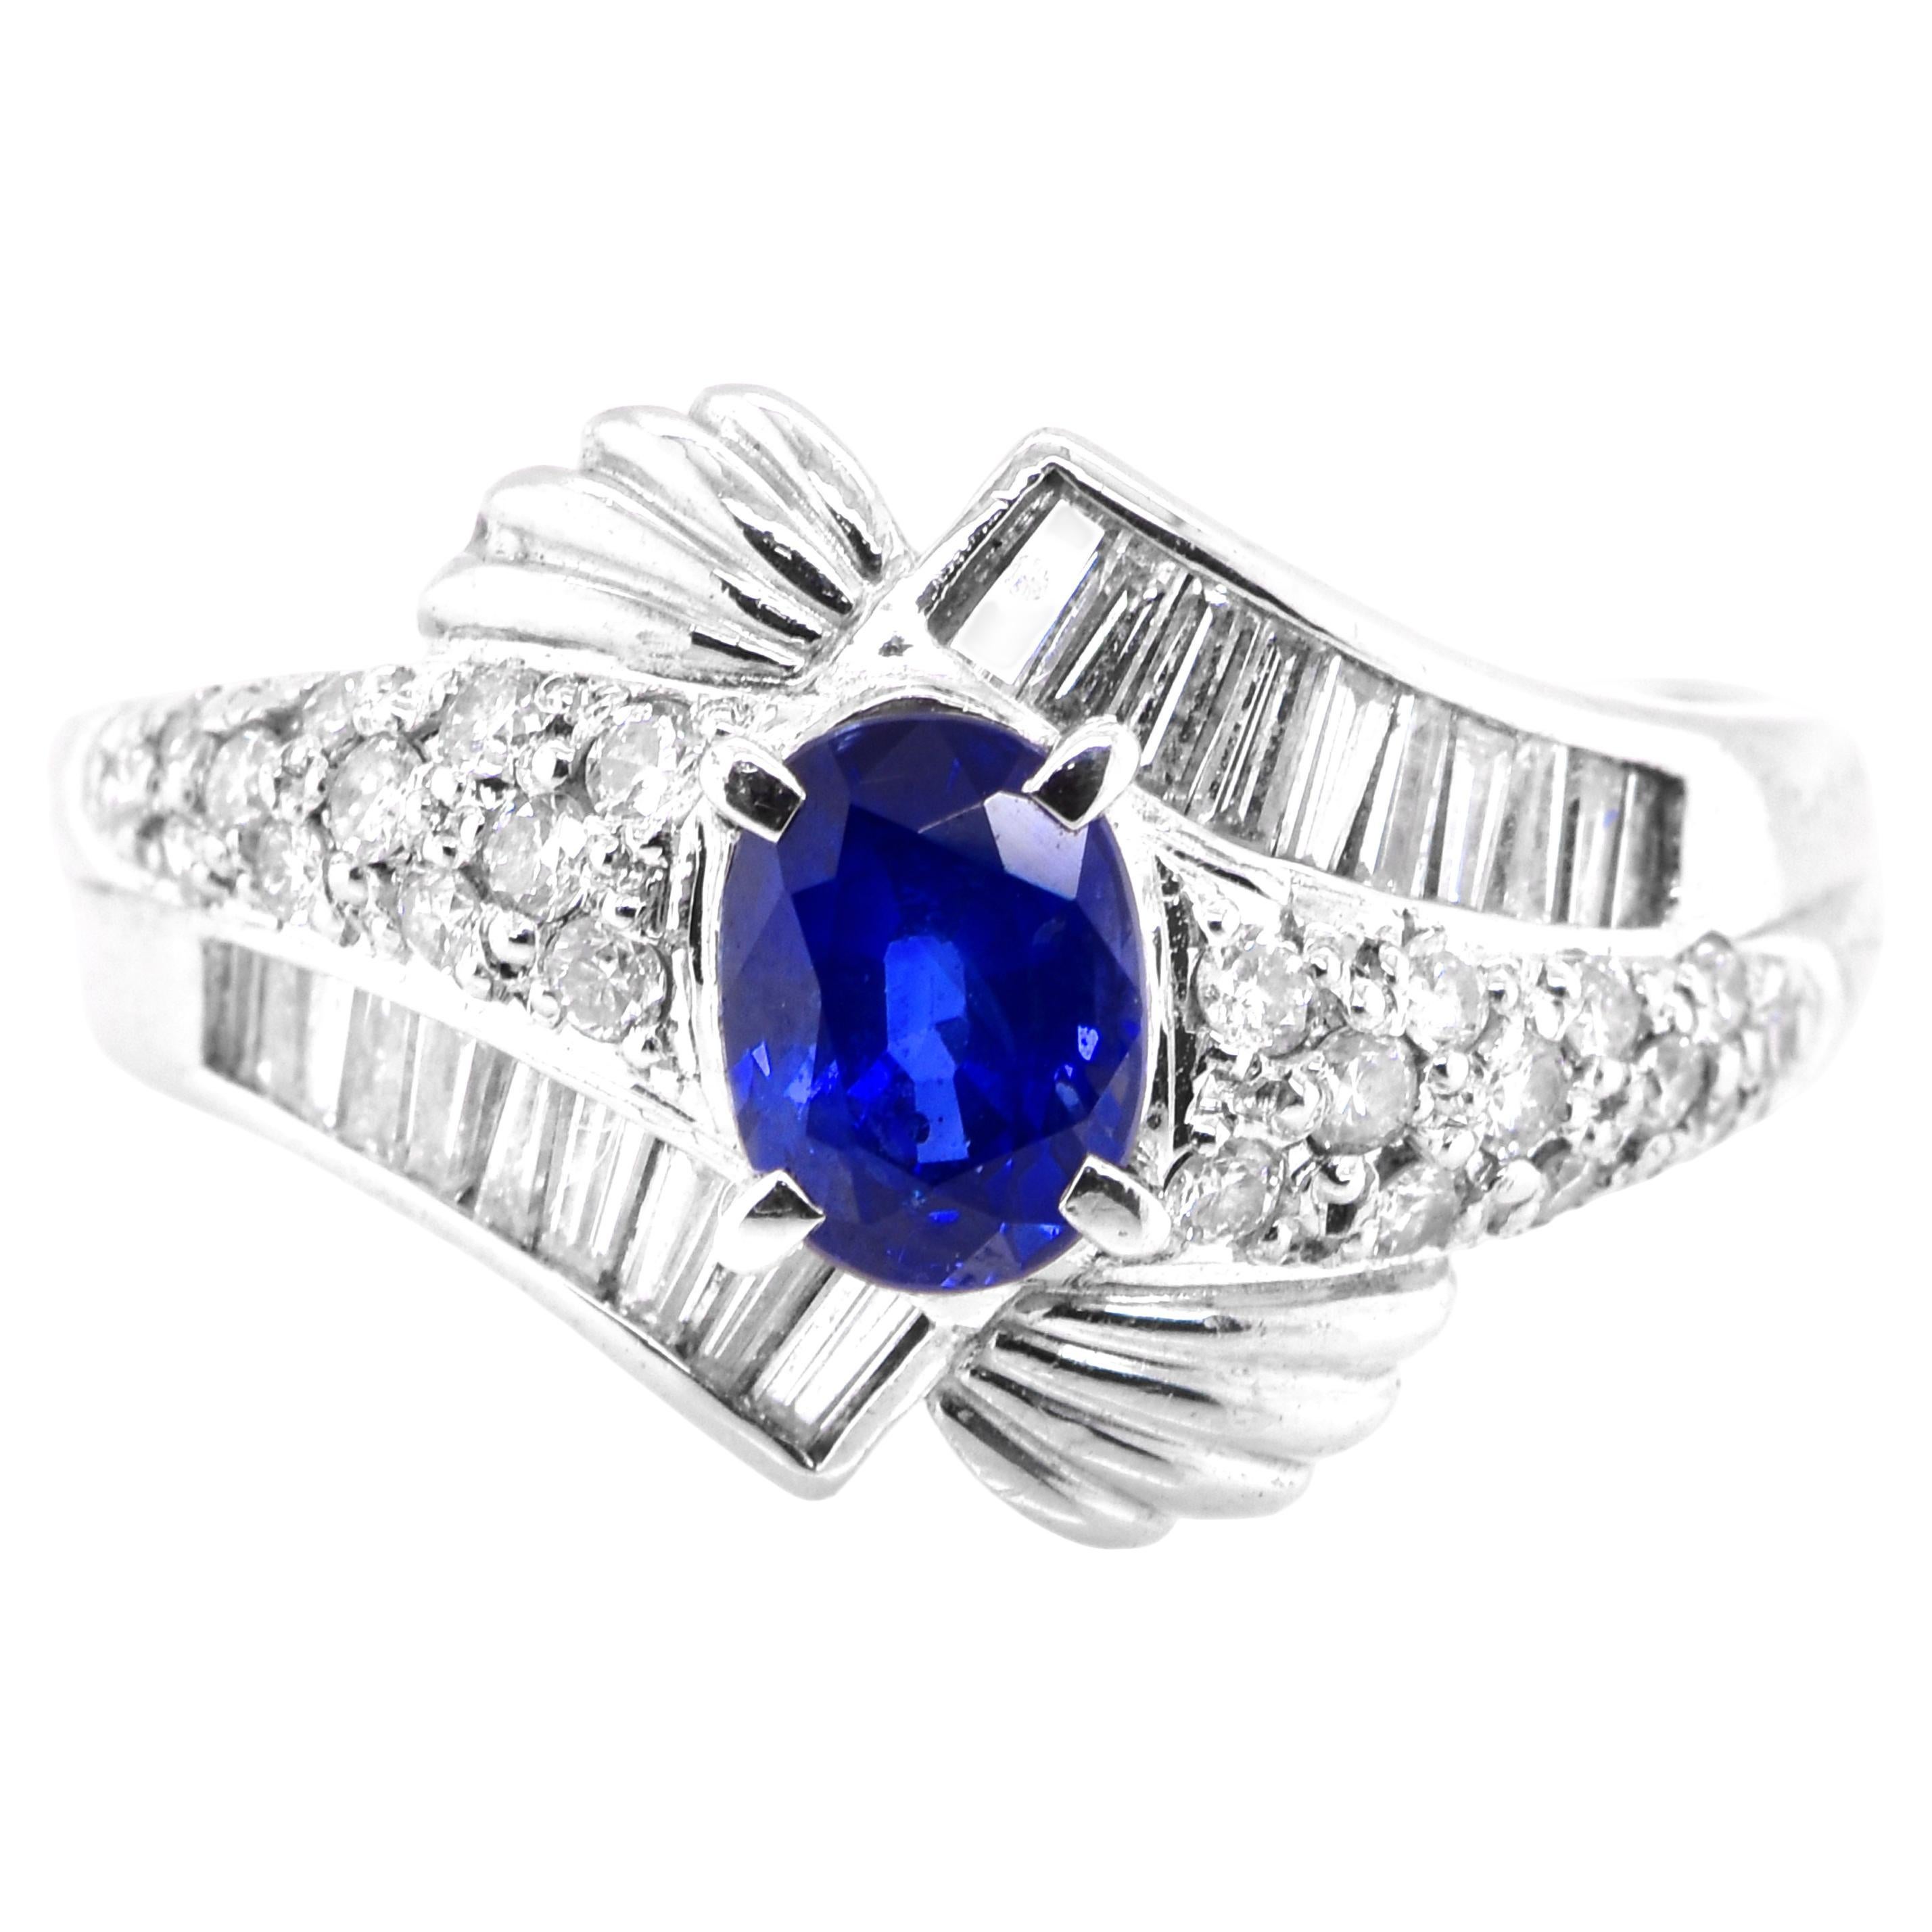 Vintage Platinum Ring featuring a 1.05 Carat Blue Sapphire and Diamonds For Sale